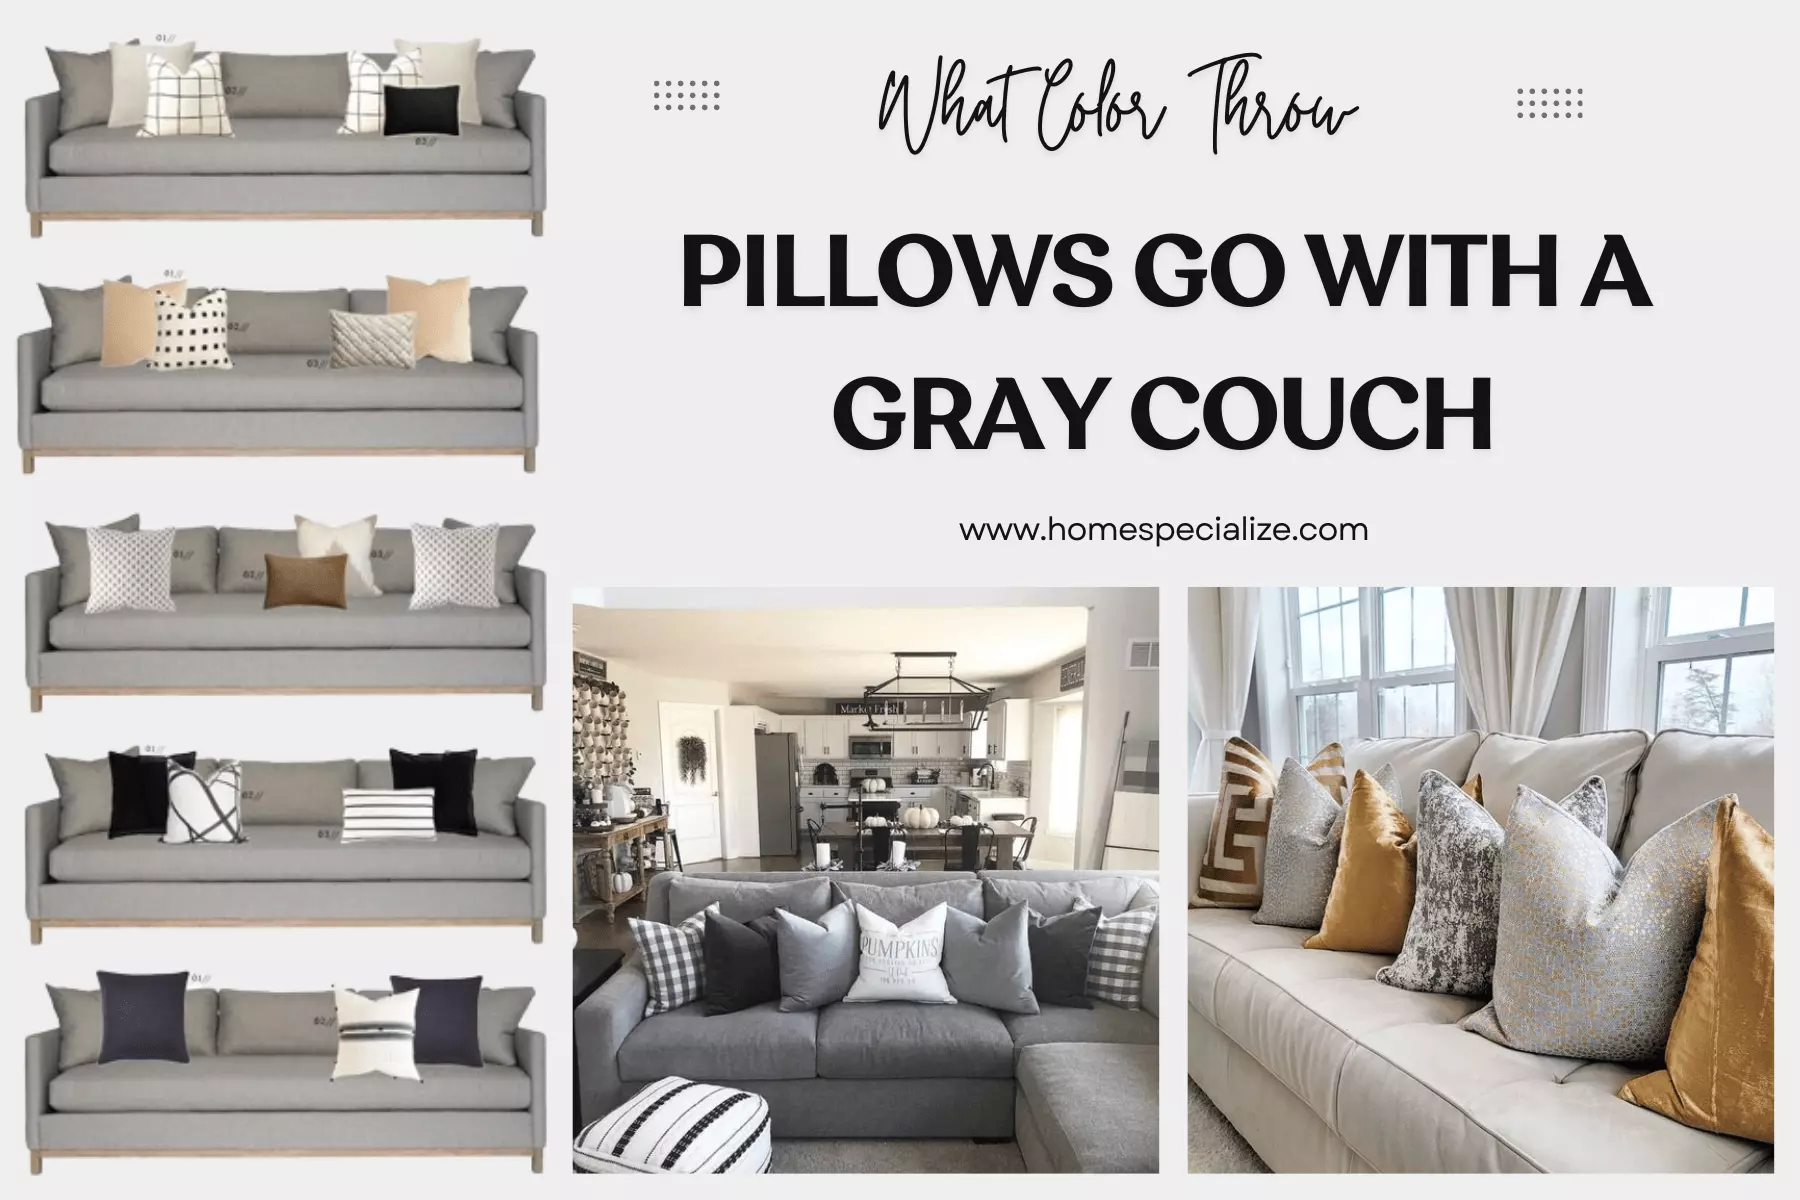 What Color Throw Pillows Go with a Gray Couch